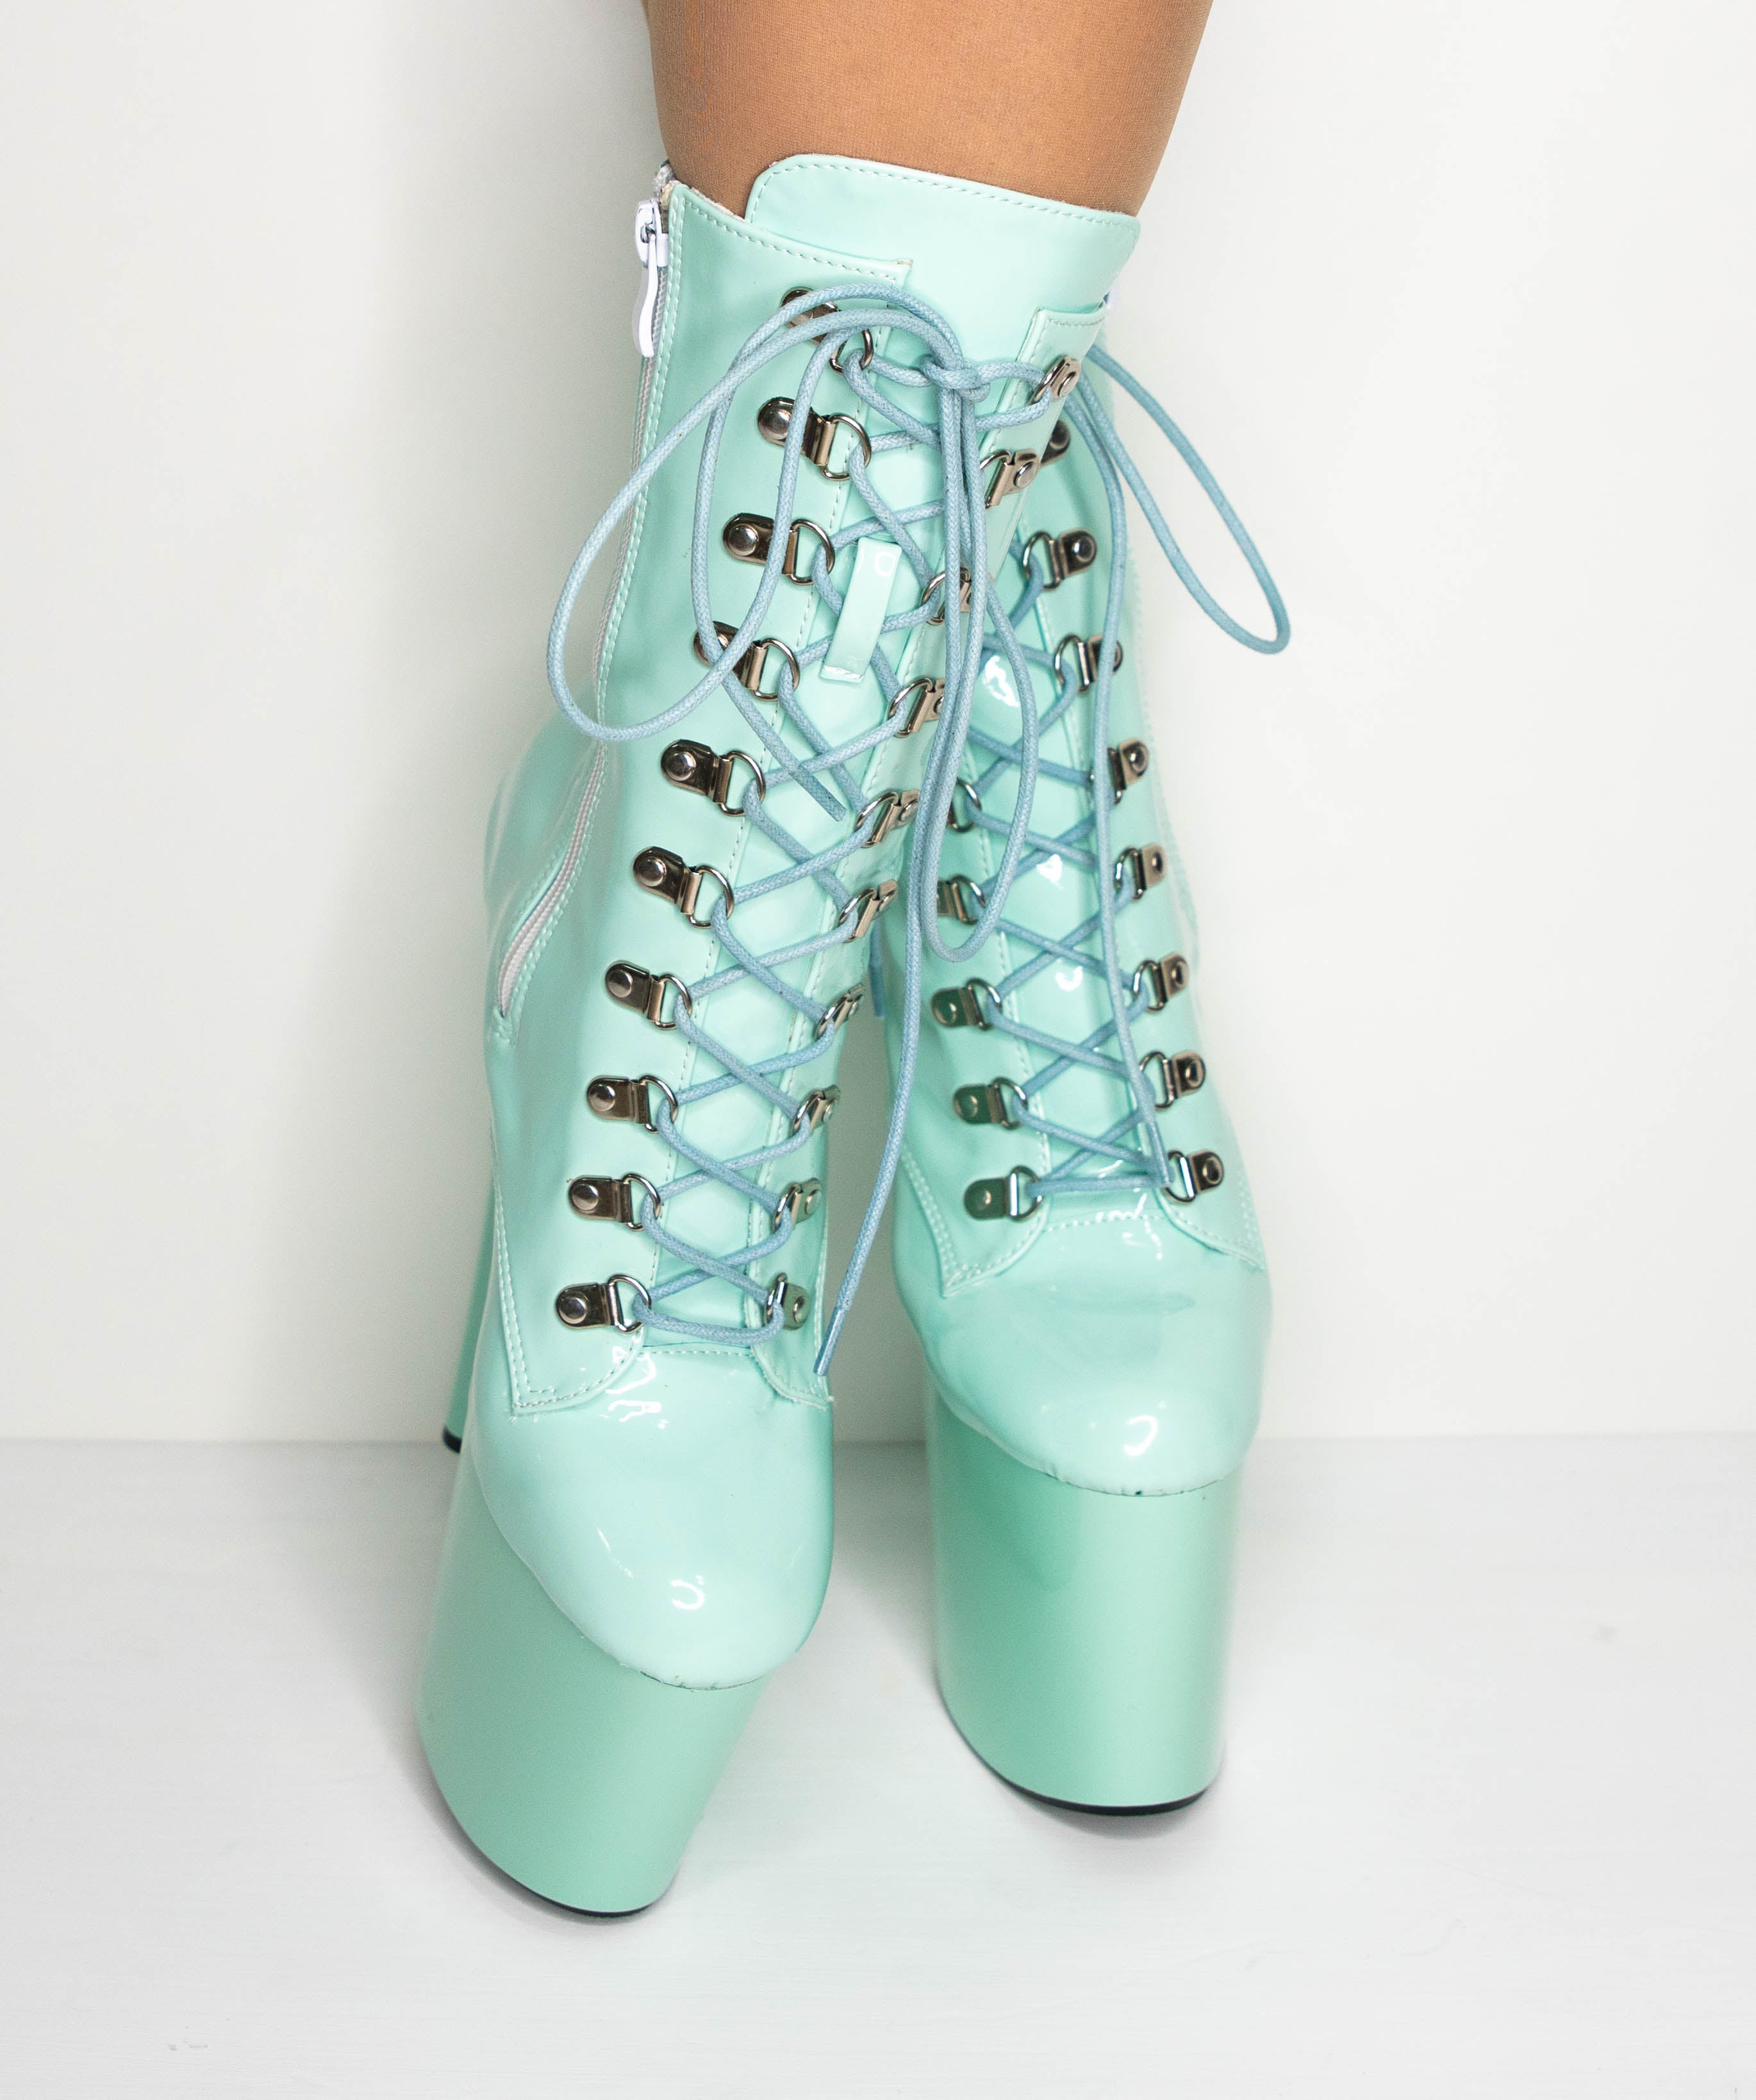 size 5 and 6 only Spearmint 8